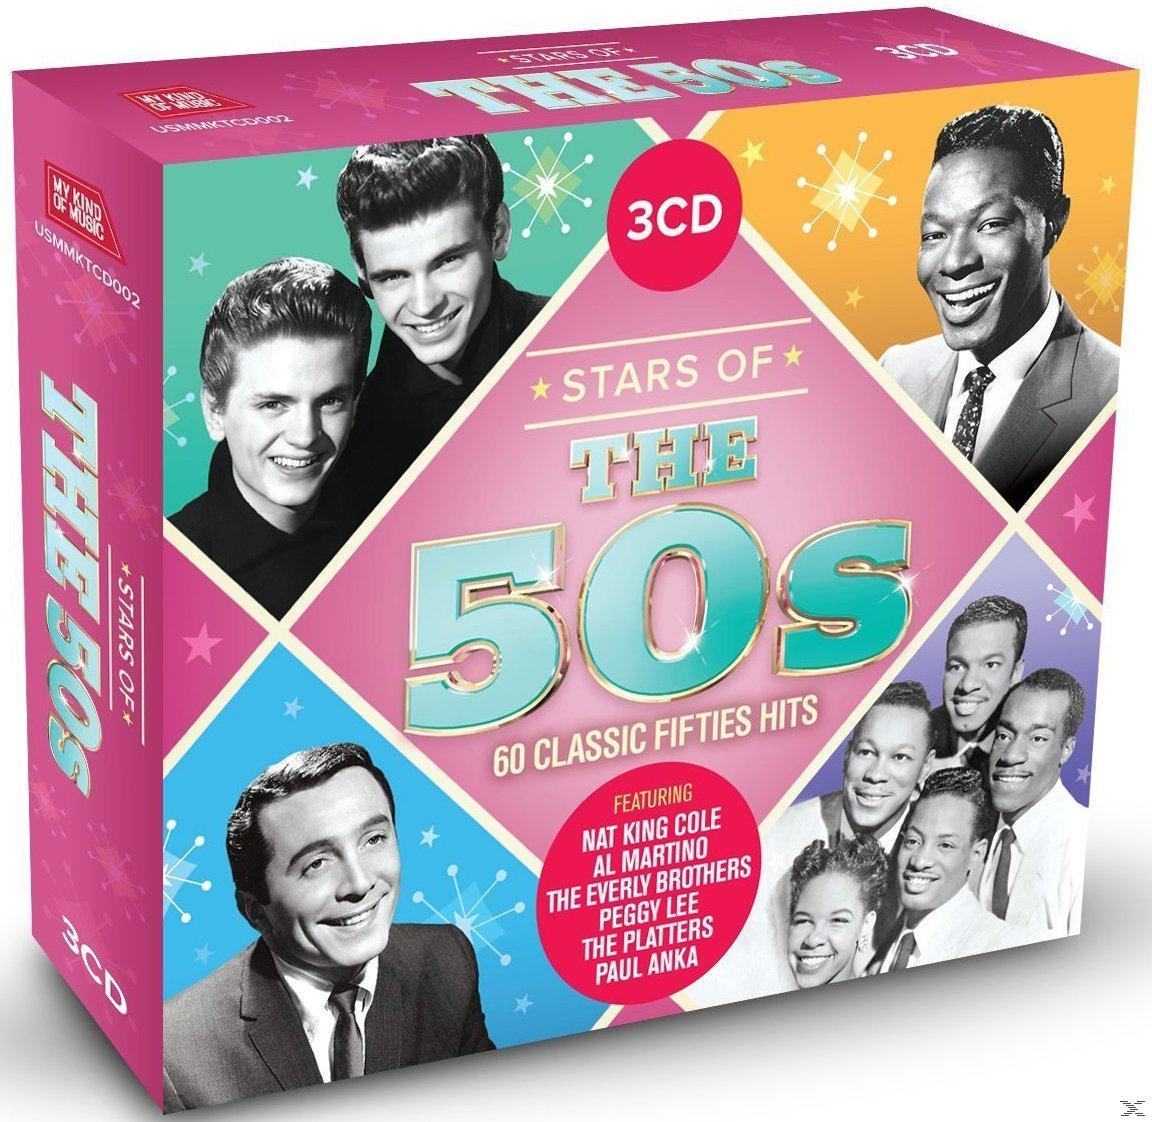 VARIOUS - Stars Of The (CD) 50s 